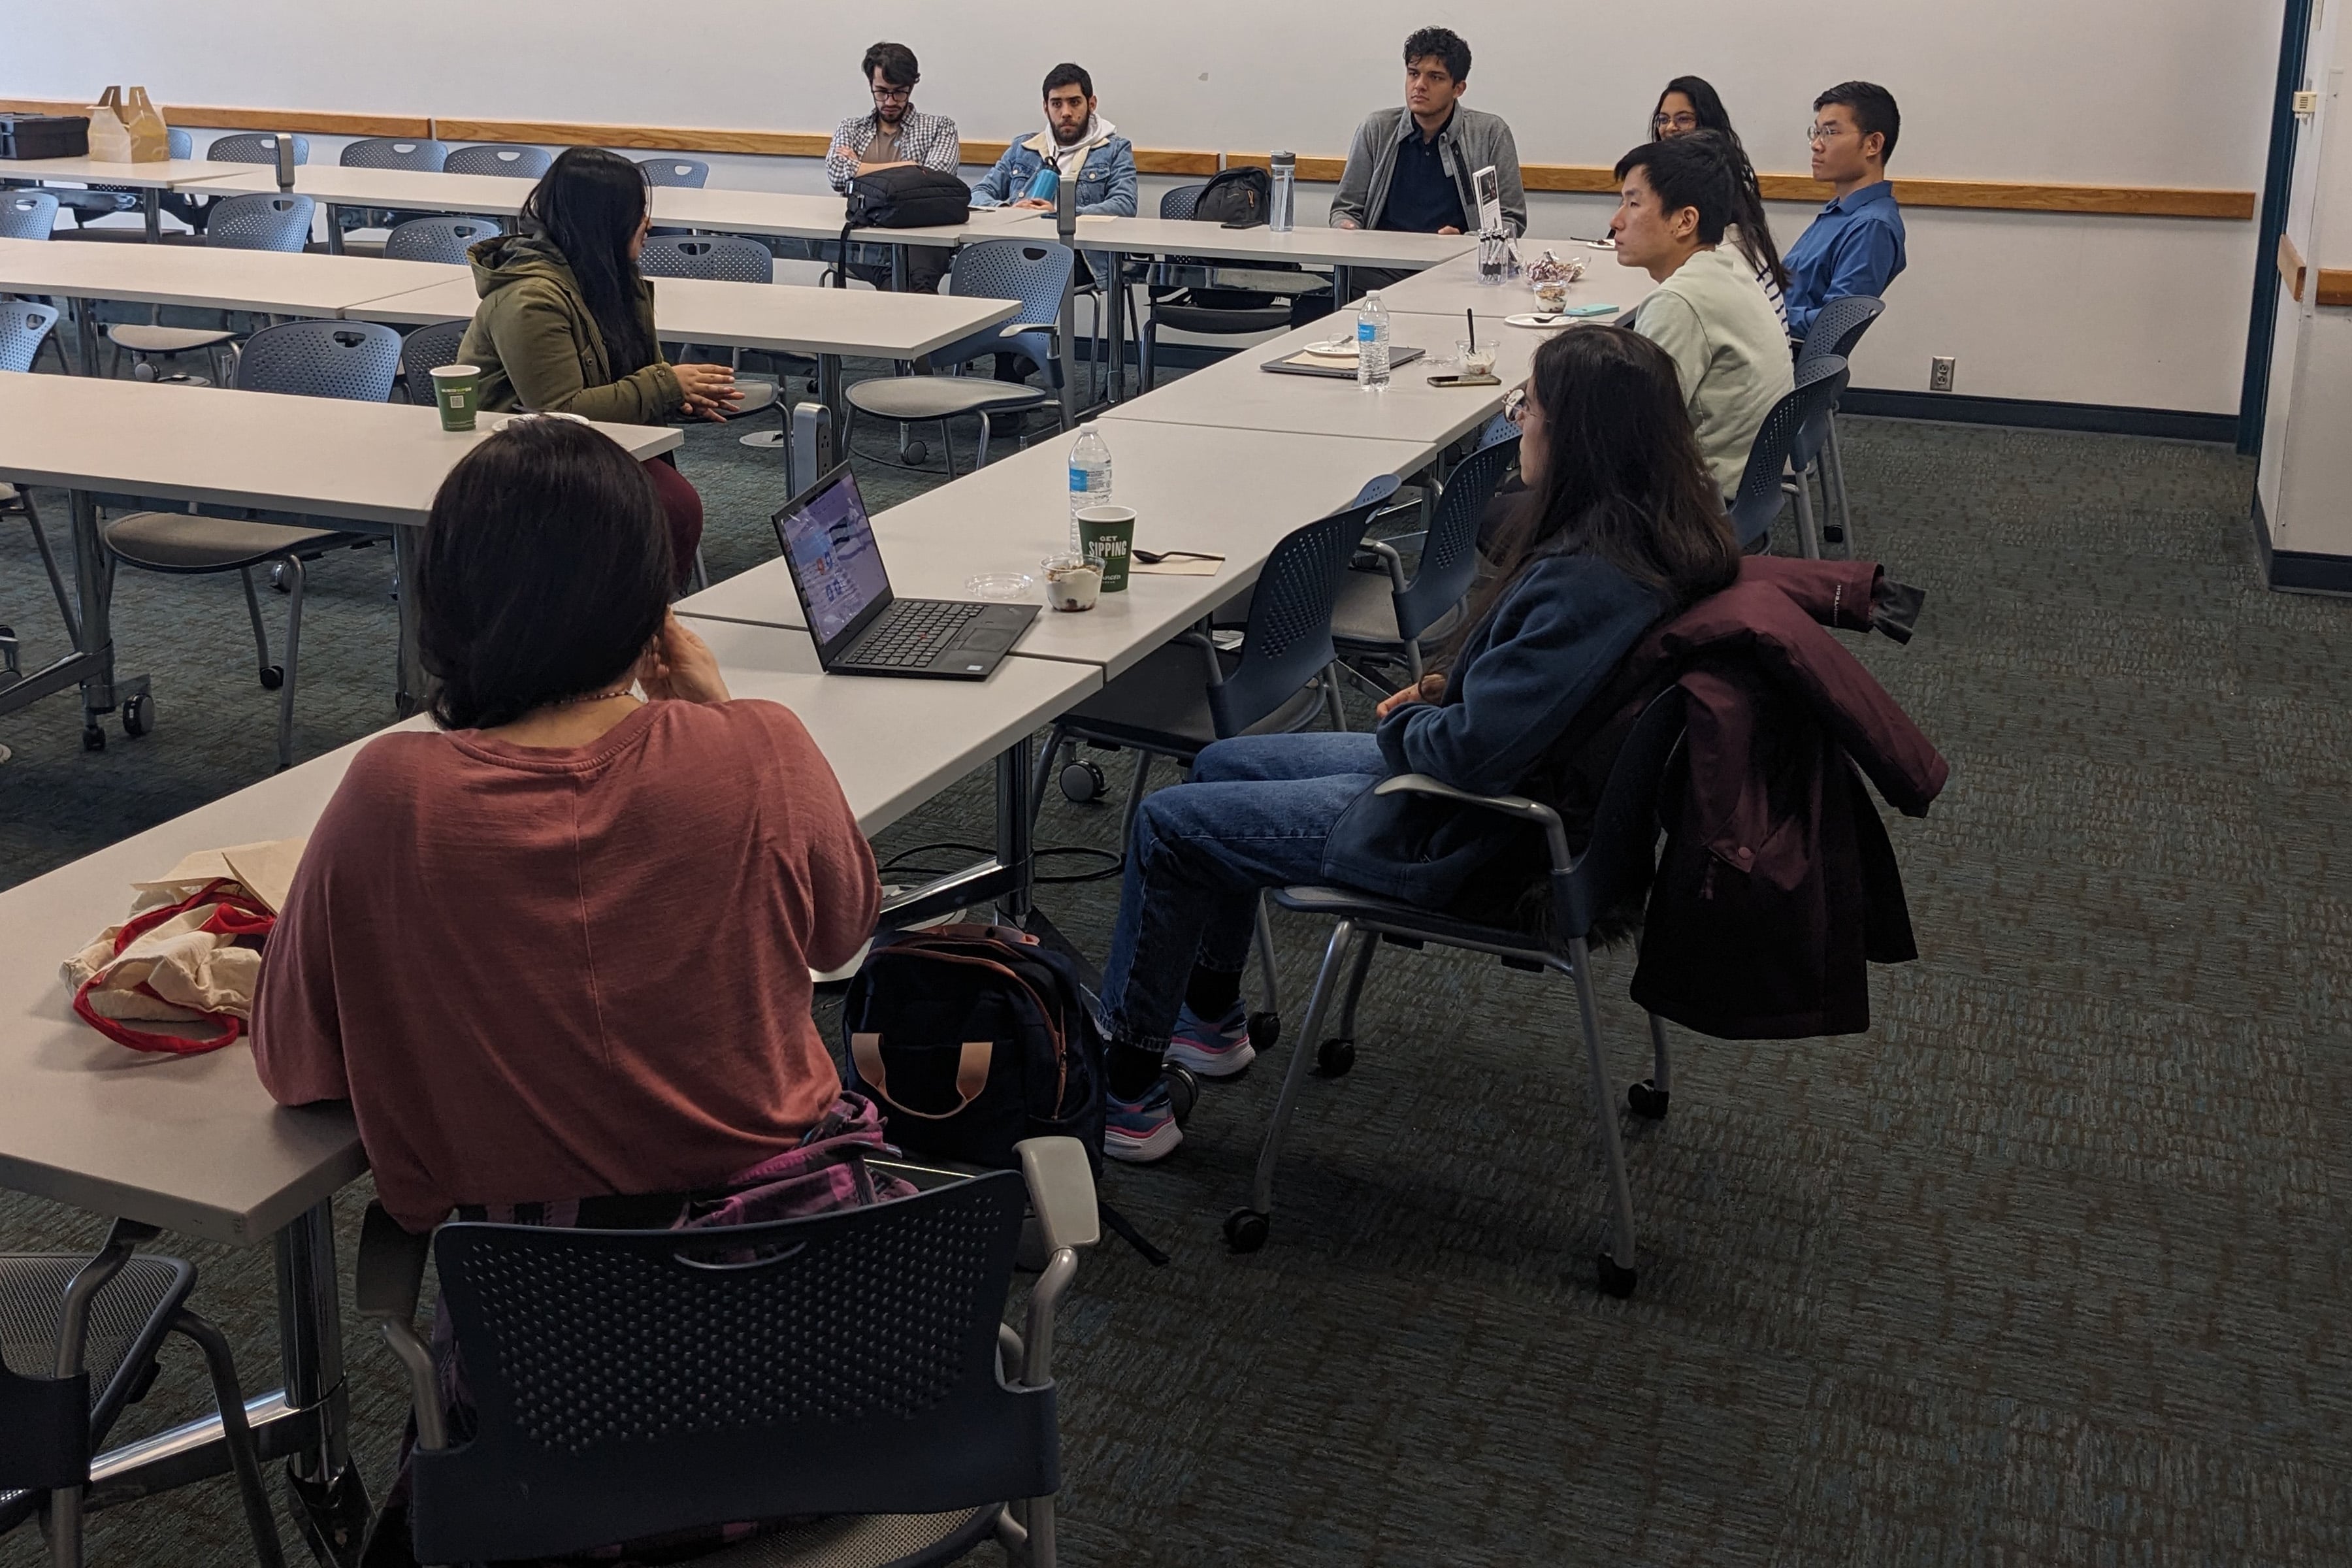 AI-SDM students at a social event, seated in a meeting room and having a group discussion